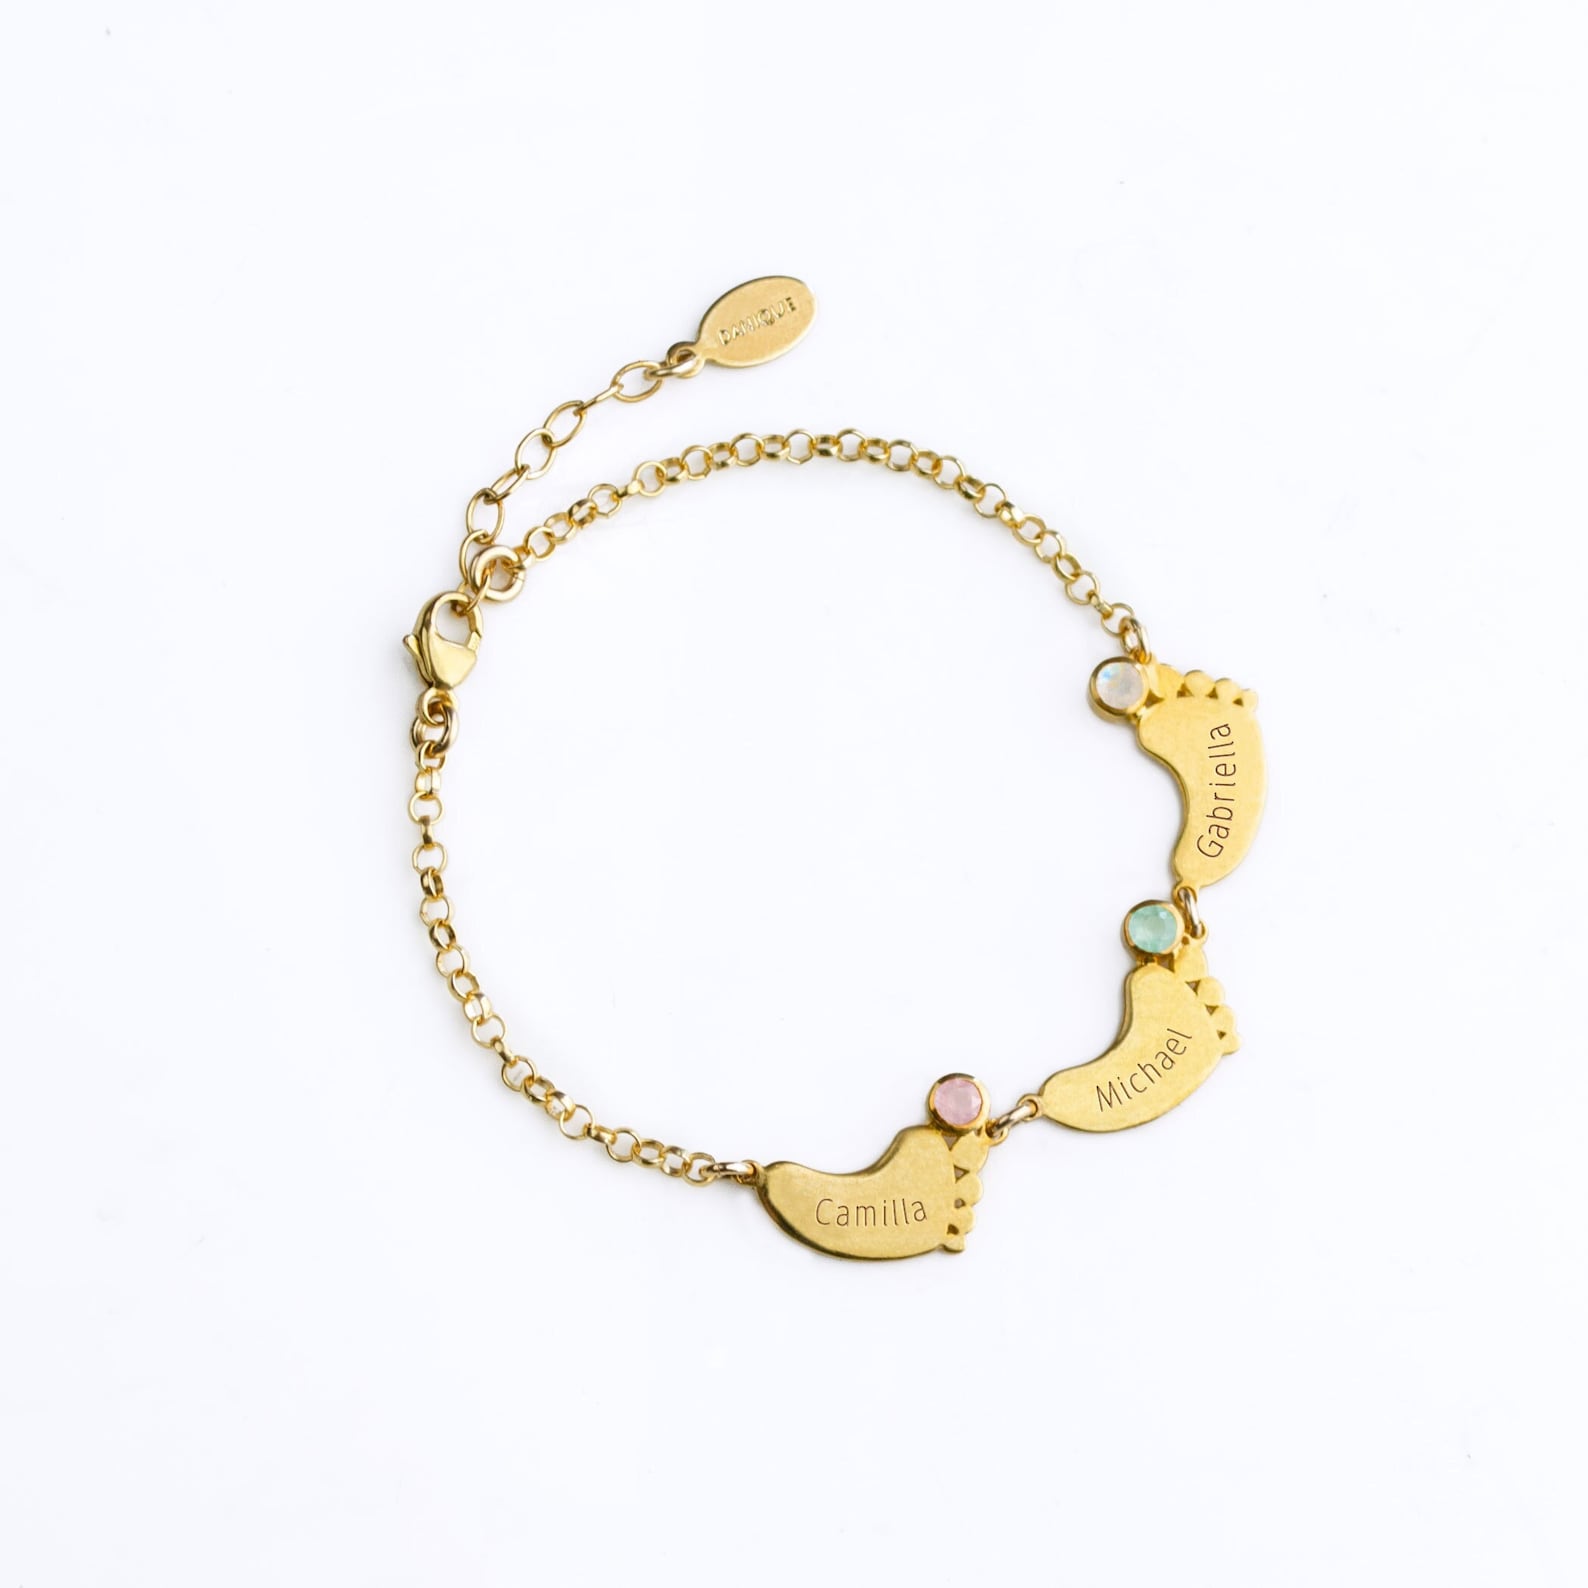 Handprint  Footprint Charm Bangle in 9ct Gold or Sterling Silver  Hold  upon Heart